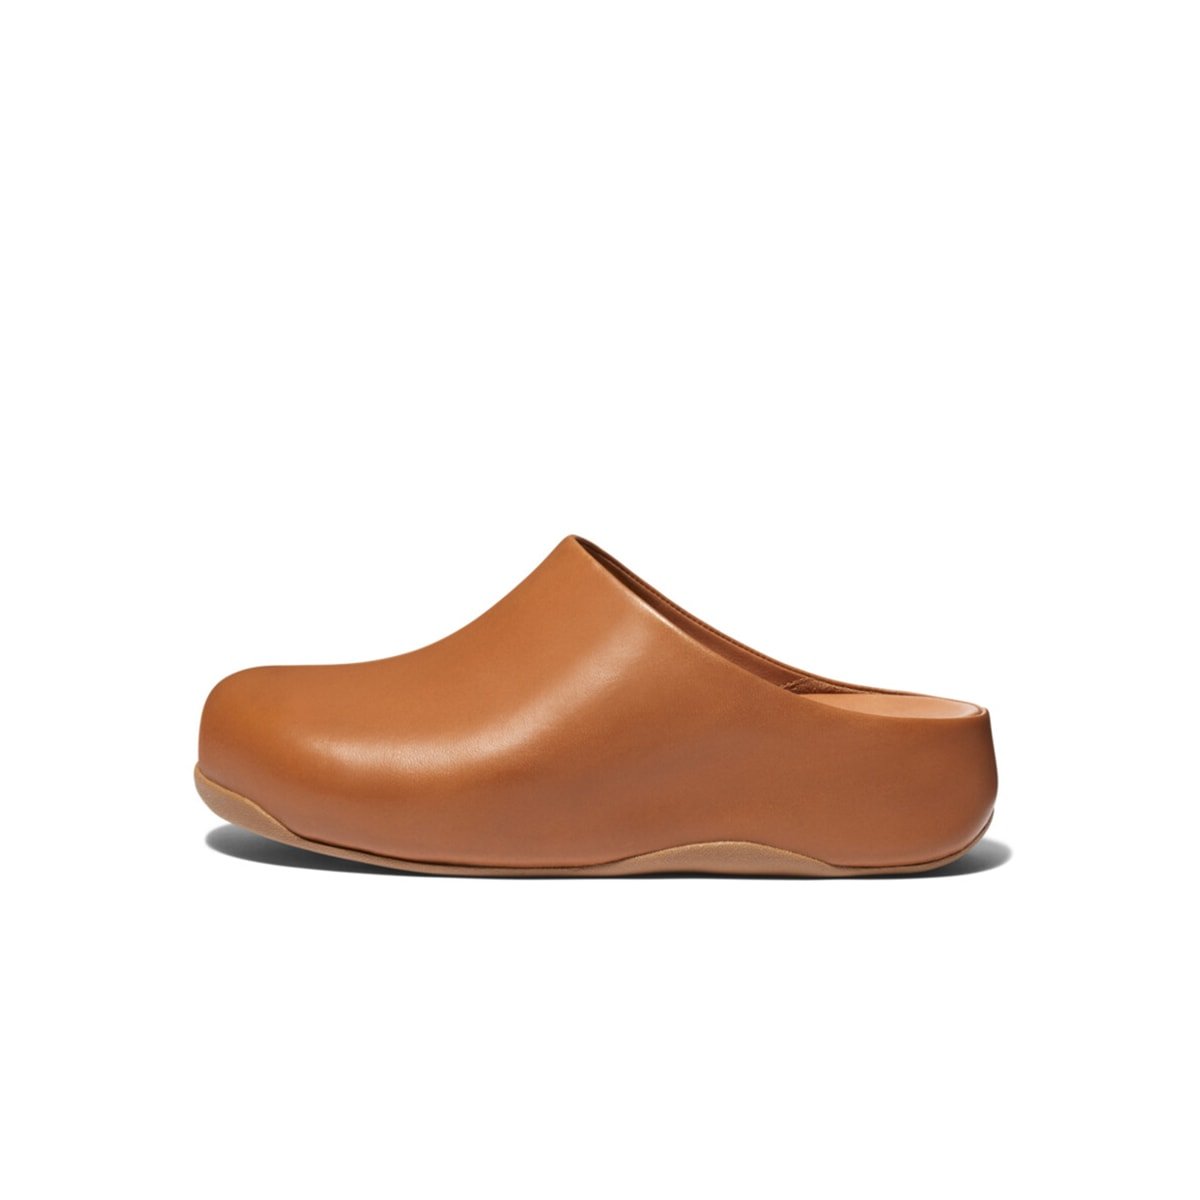 FitFlop SHUV Leather Clogs Light Tan front view